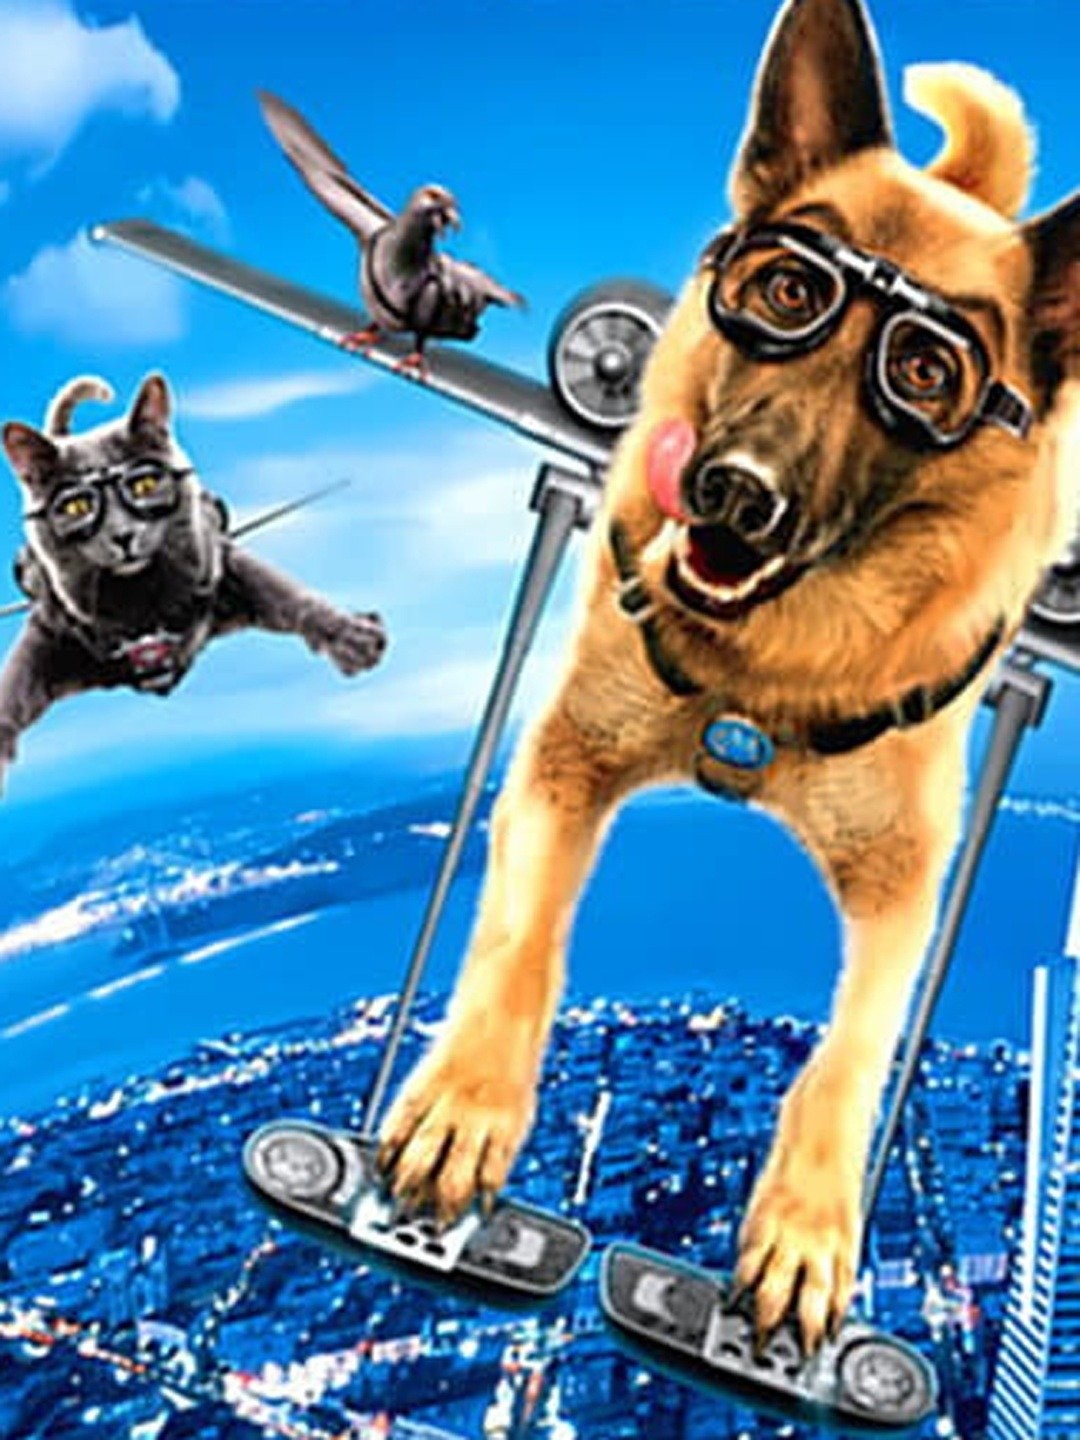 Cats & Dogs - Rotten Tomatoes